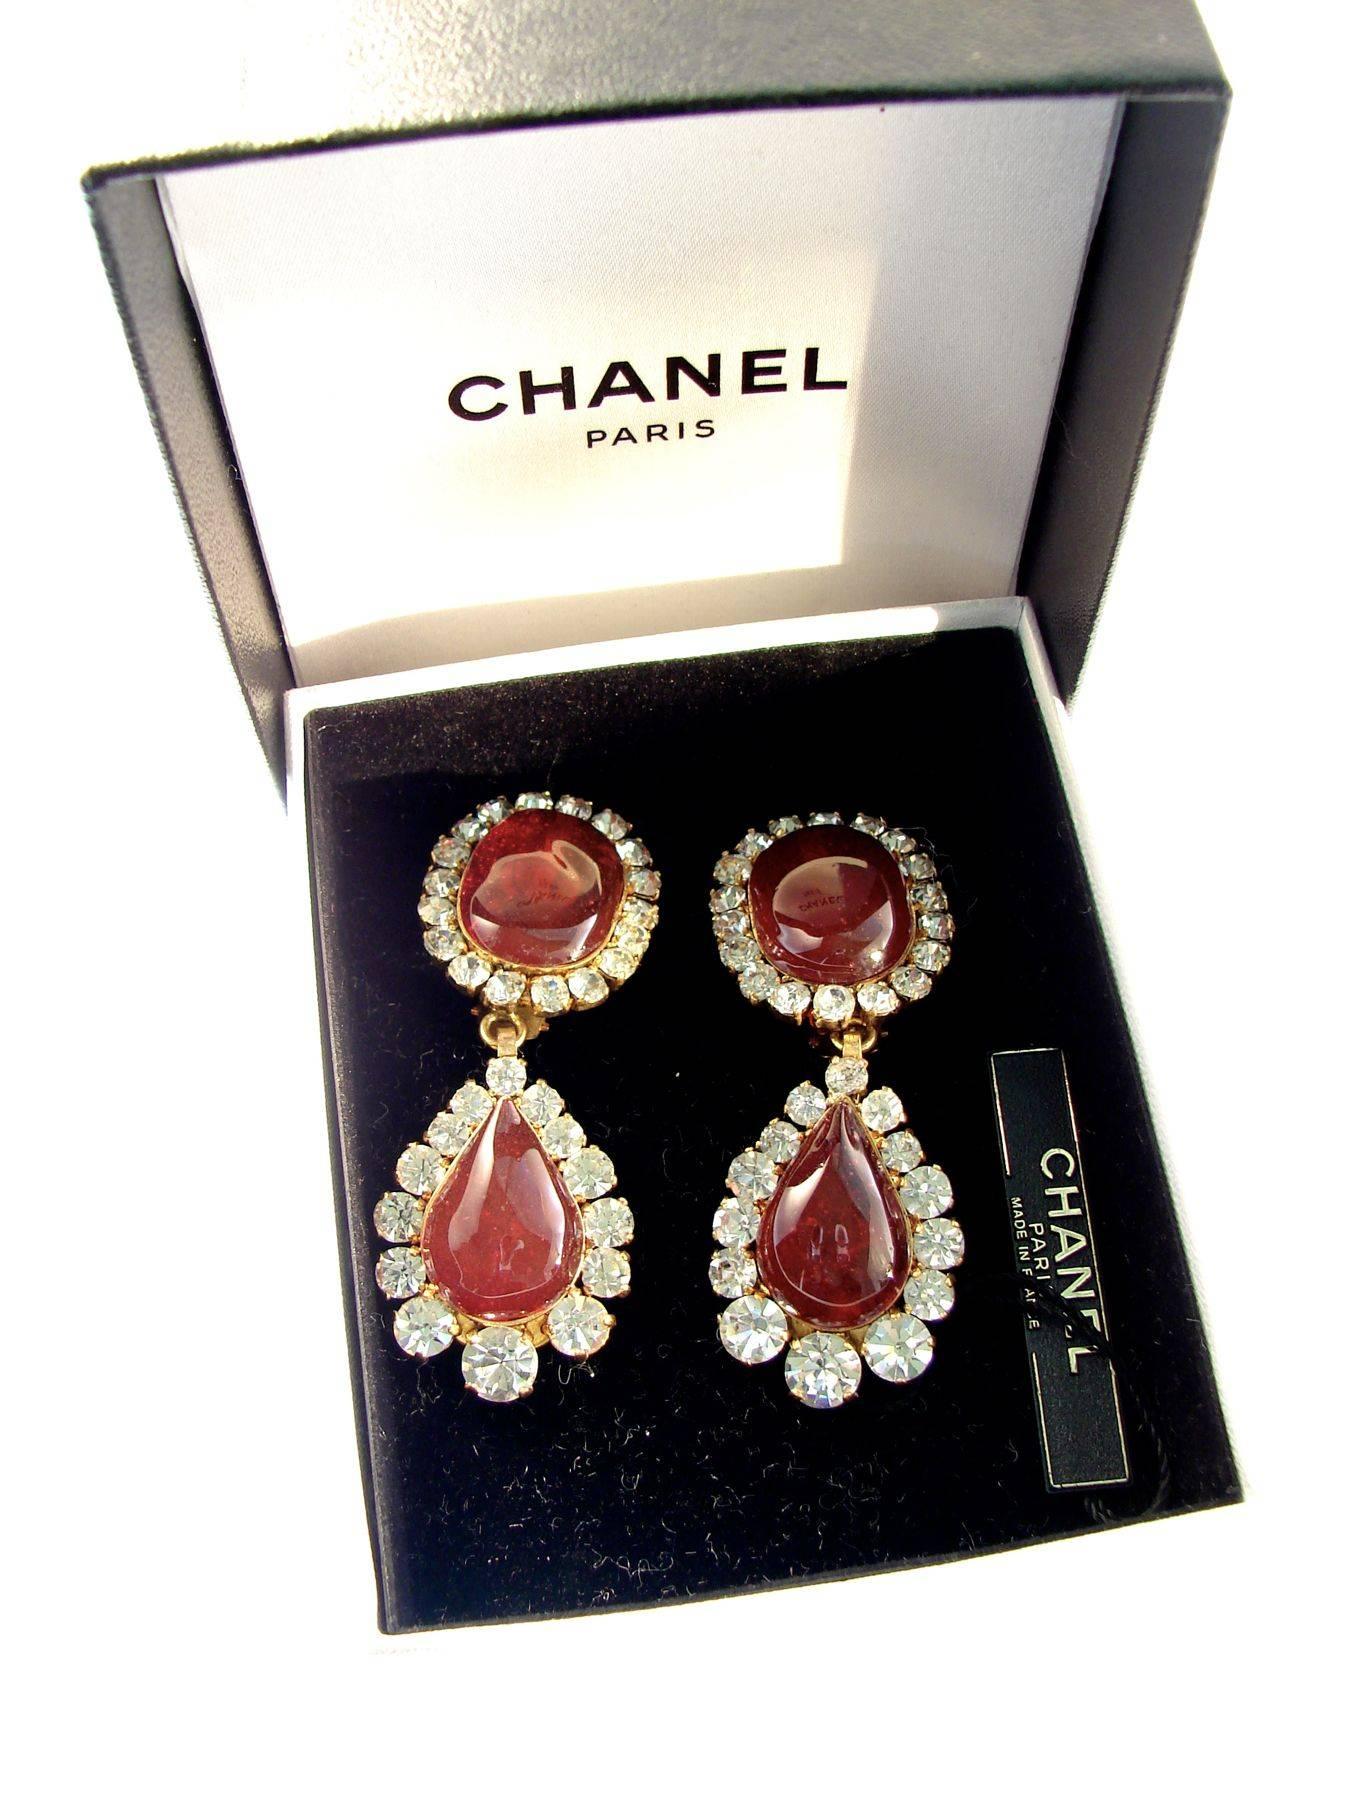 These fabulous Chanel earrings were created in 1995 as part of the Season 29 collection by Victoire de Castellane for Chanel.  Made from a gold metal setting, they feature large rose-colored poured glass cabochons surrounded by sparkling diamante